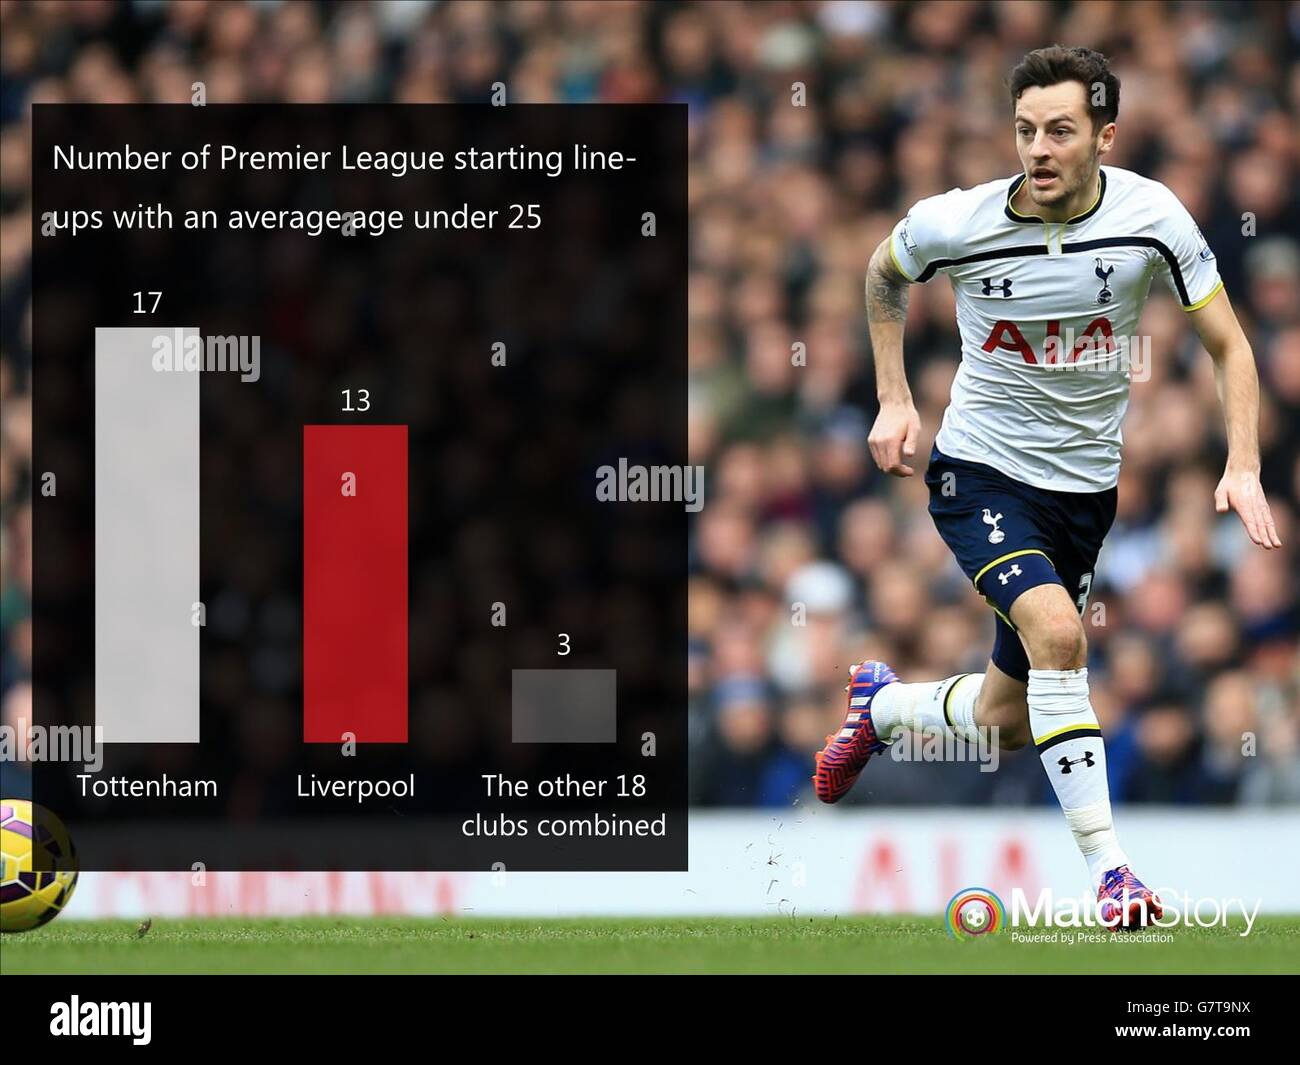 A Match Story graphic showing the number of Premier League starting line-ups with an average age under 25. Stock Photo